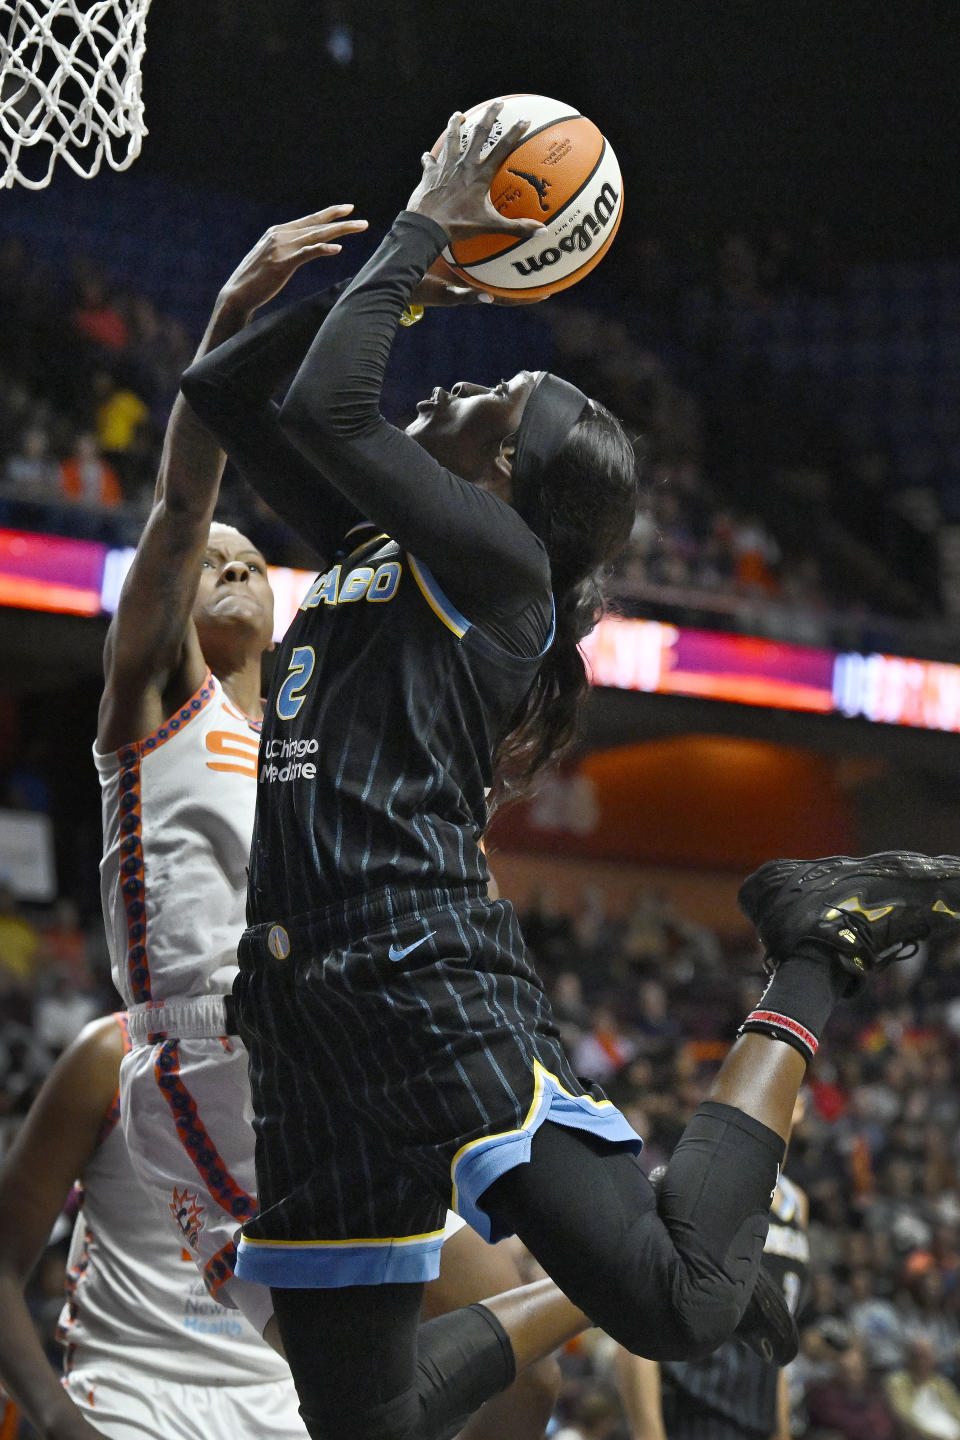 Chicago Sky guard Kahleah Copper, right, is fouled by Connecticut Sun guard Courtney Williams as she shoots during the first half of Game 4 of a WNBA basketball playoff semifinal Tuesday, Sept. 6, 2022, in Uncasville, Conn. (AP Photo/Jessica Hill)